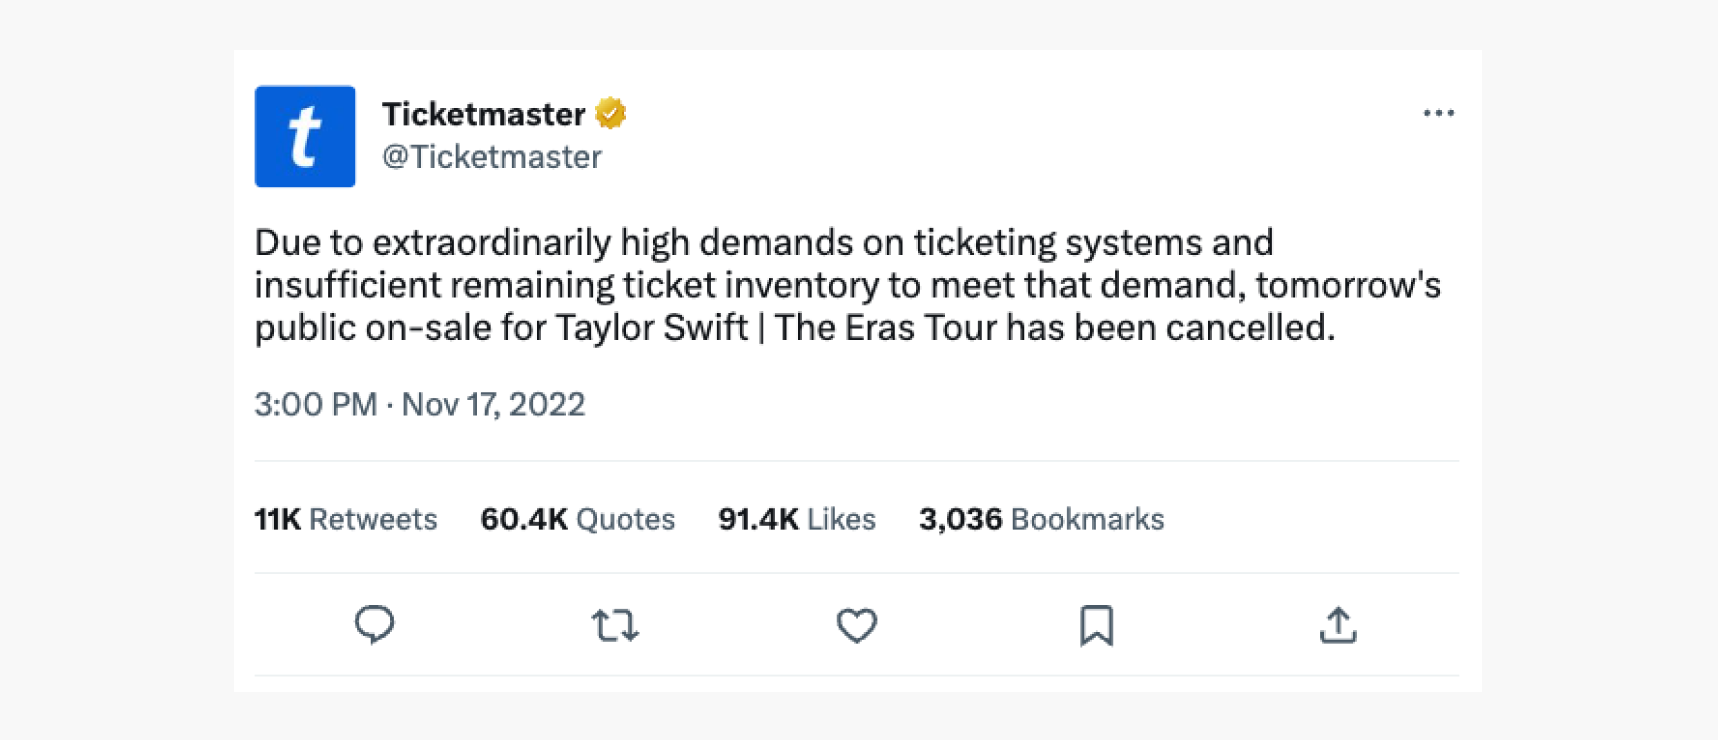 Tweet from Ticketmaster about cancelling a sales event since their site crashed due to high volumes of user traffic